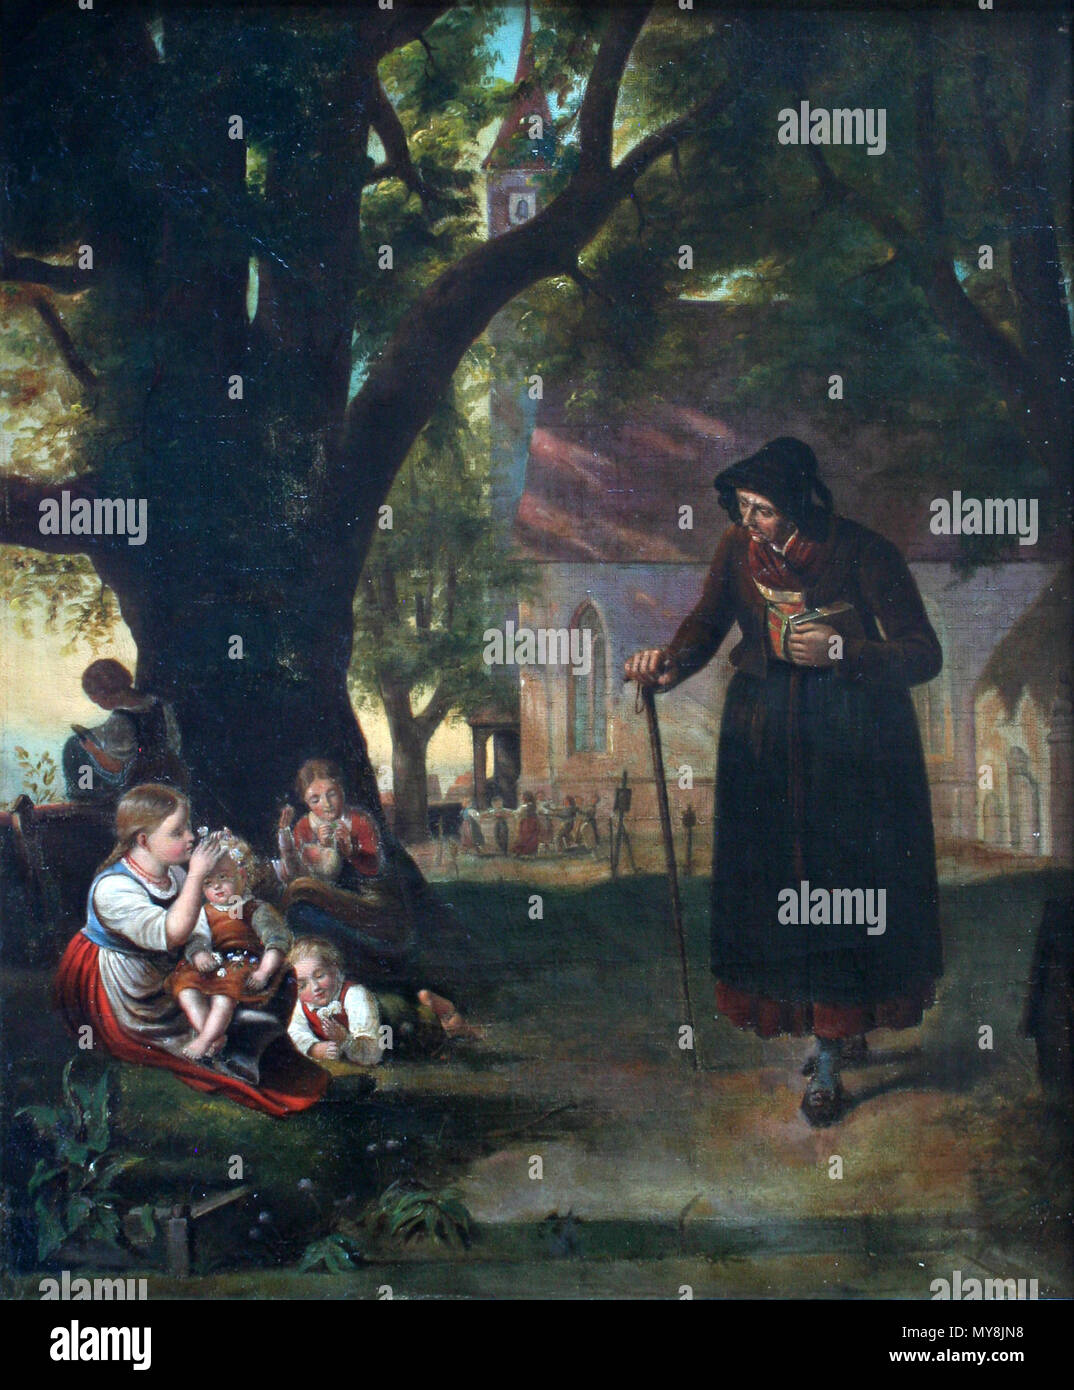 . English: An dour old woman clutching a Bible gazes at some happy children. In the background children play among grave markers in a churchyard. 19th century. Unknown 572 Youth and Old Age Meet Near a Church Stock Photo